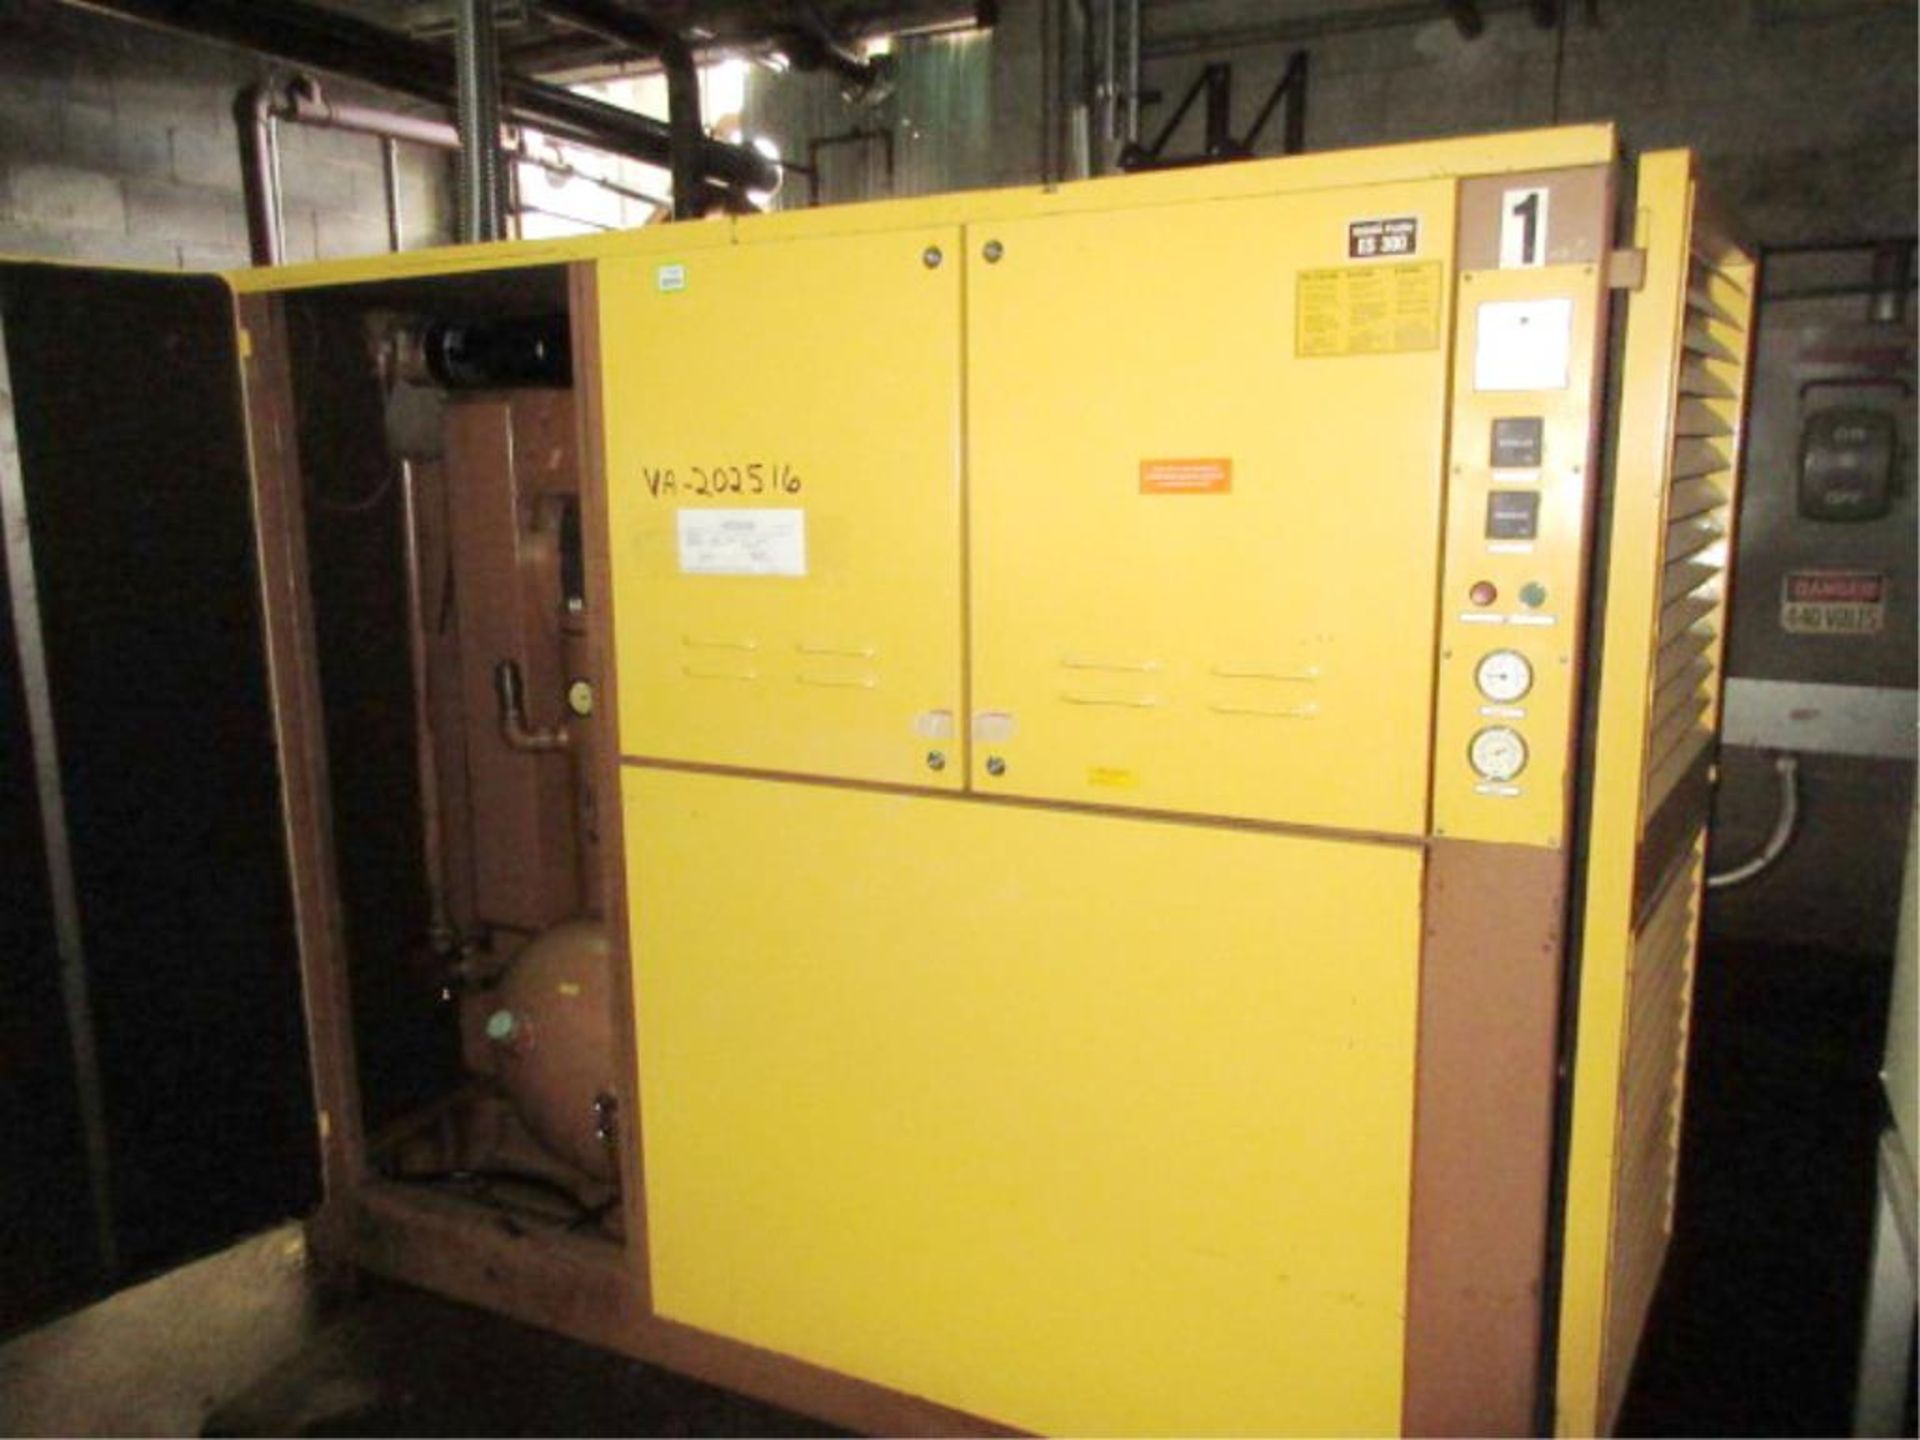 Kaeser ES 300 Sigma Profile Rotary Screw Air Compressor, (1987), 160 KW motor, service/load hrs. - Image 2 of 8